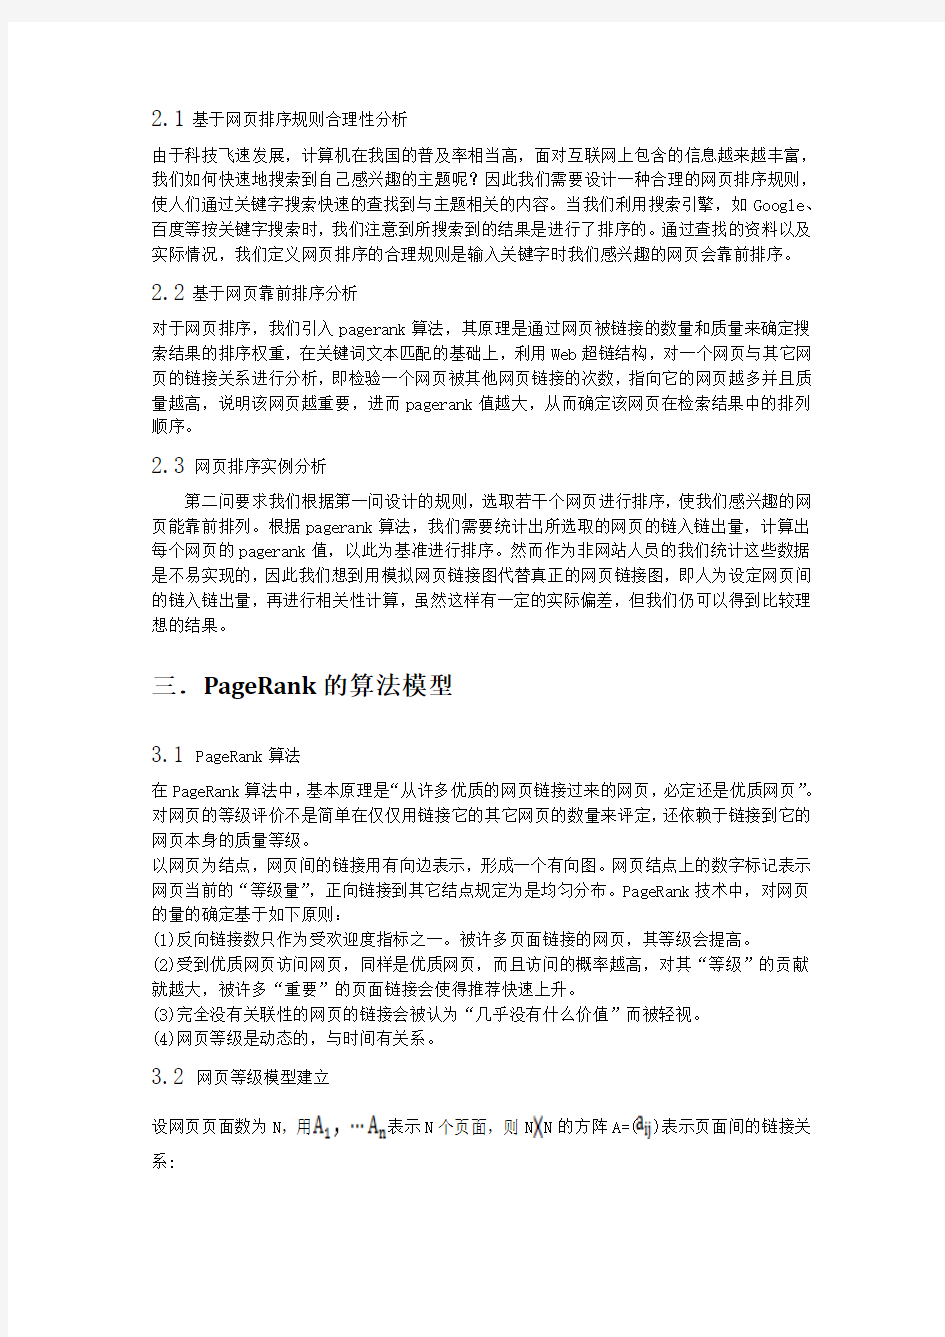 4 PageRank算法